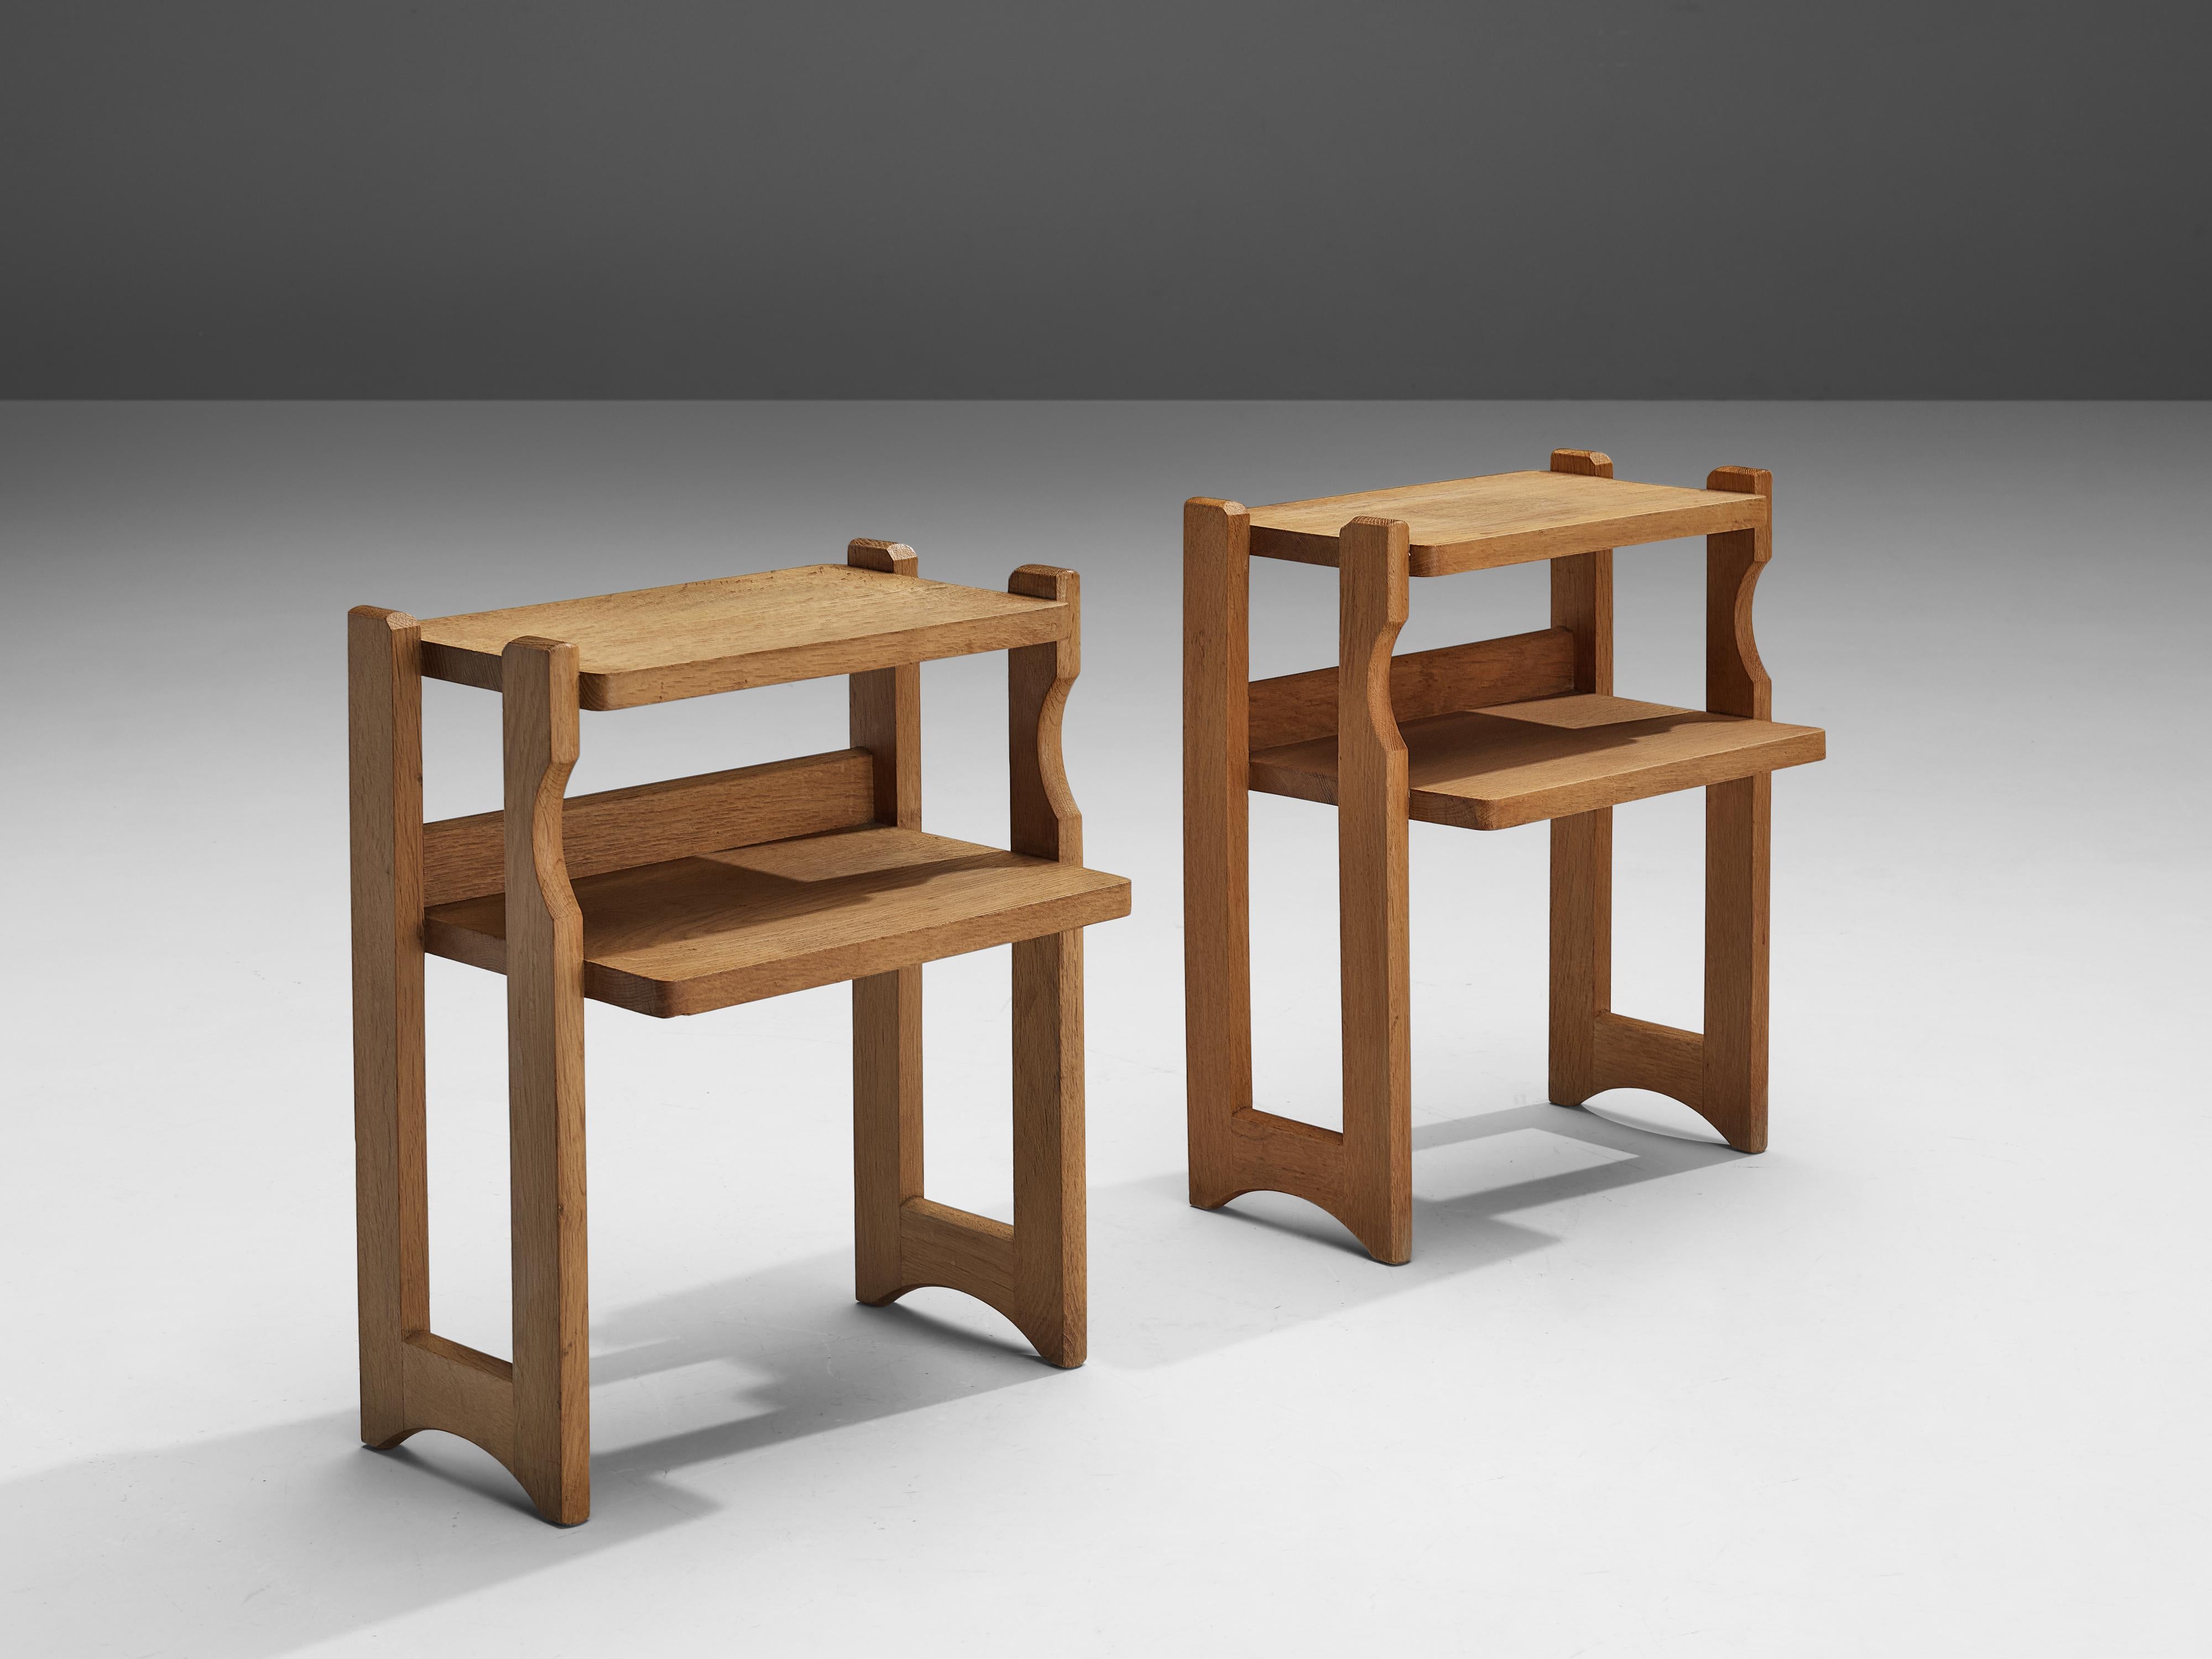 Guillerme & Chambron, side tables, oak, France, 1960s

These small side tables with one tabletop and another level were designed by the French designer duo Guillerme et Chambron. In absence of any decorative details this side table focusses on the